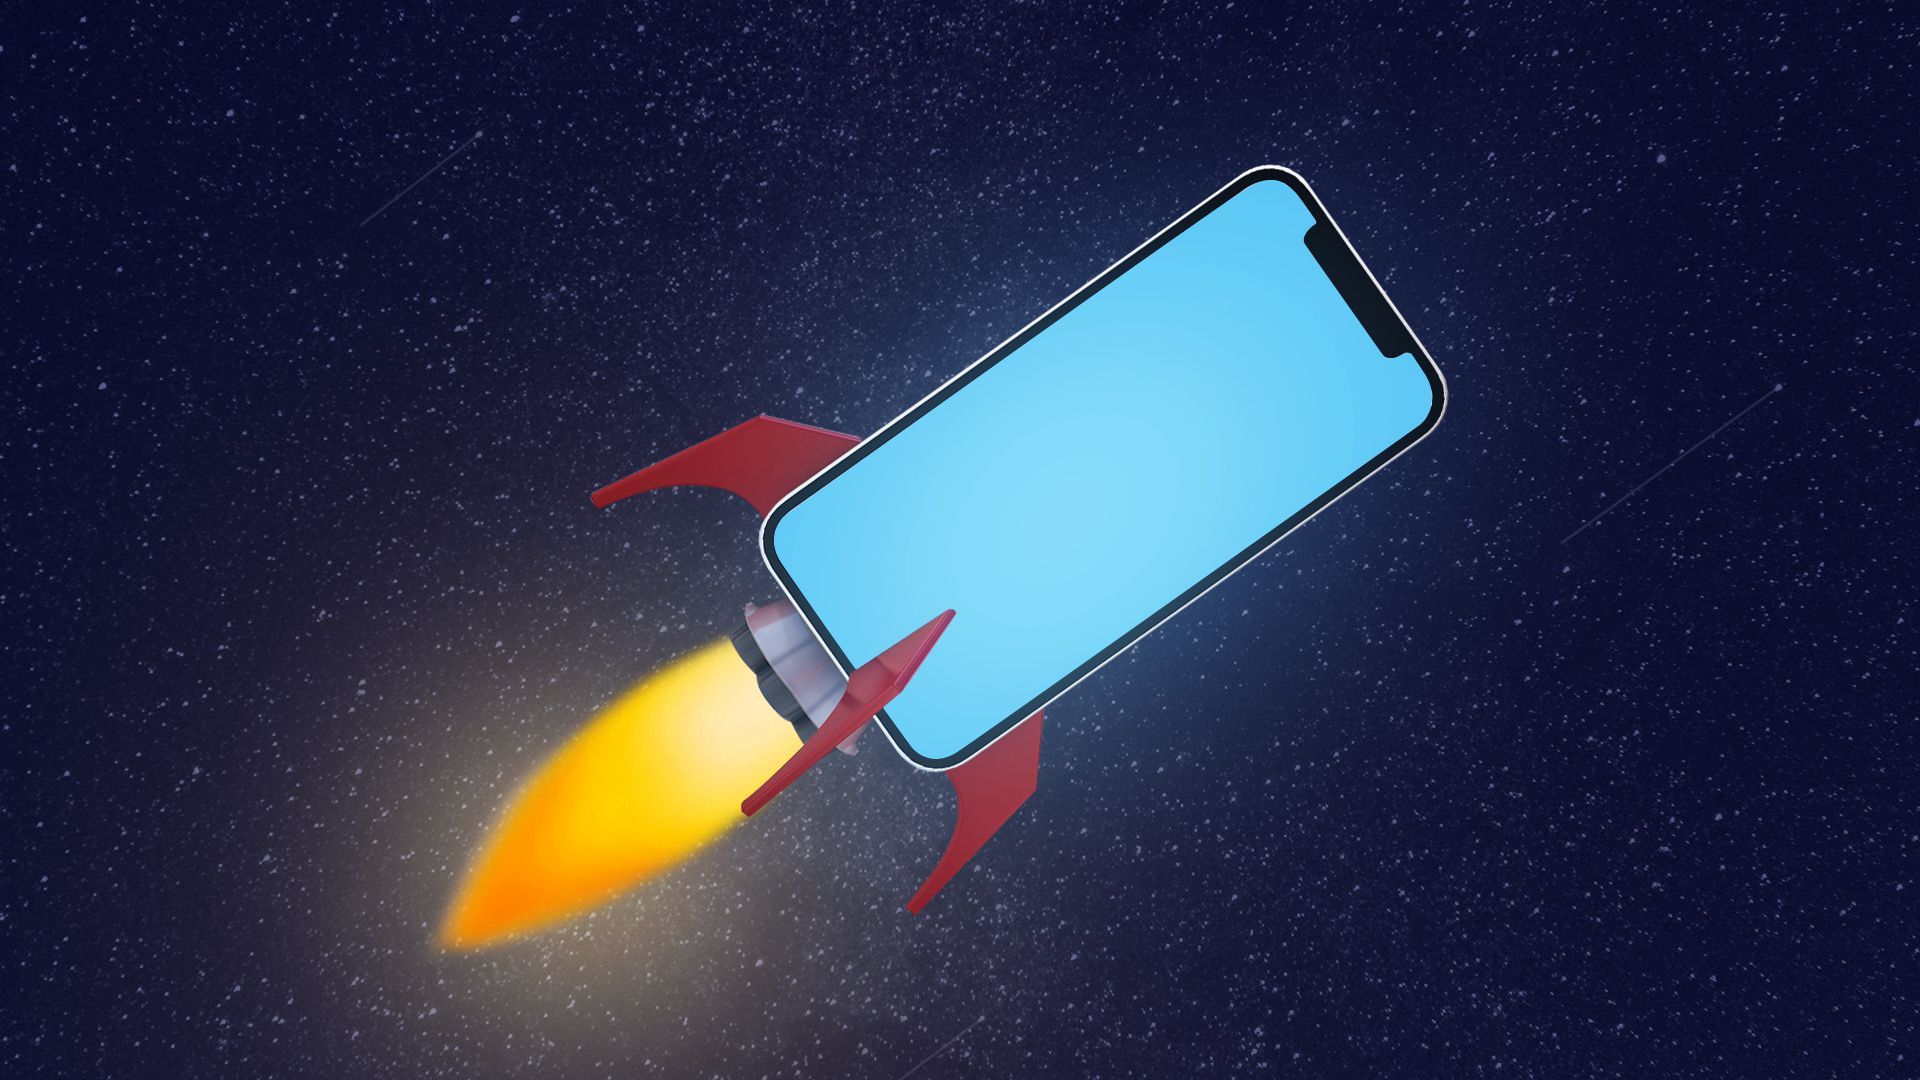 Illustration of a smartphone as a rocket hurtling through space. 